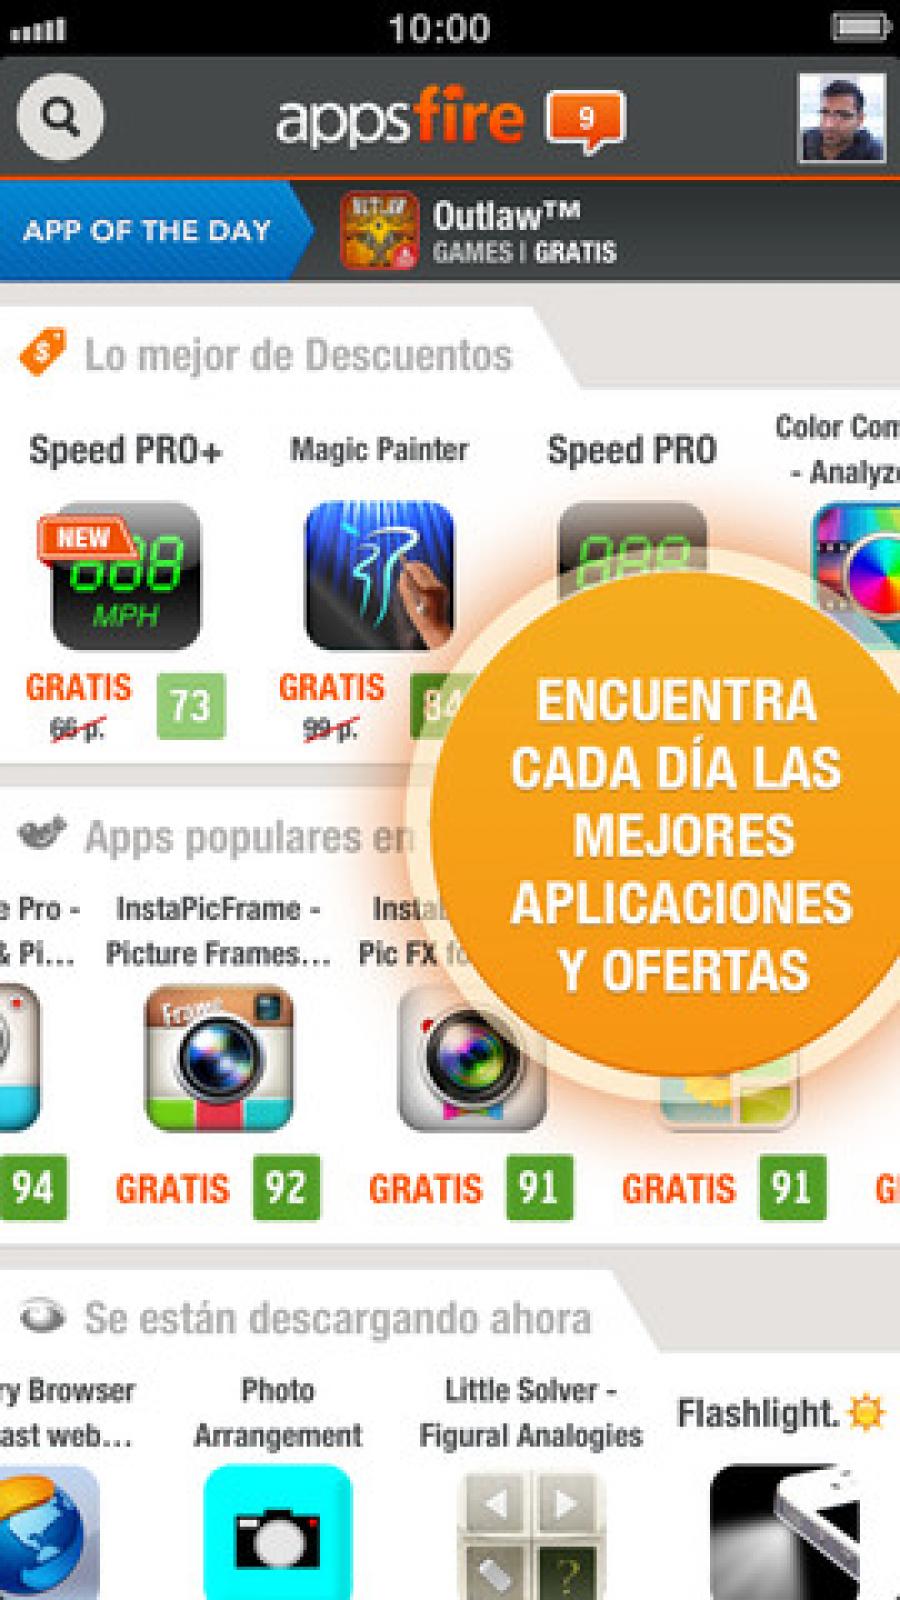 Appsfire Your Daily Dose of Fantastic Applications and Offers